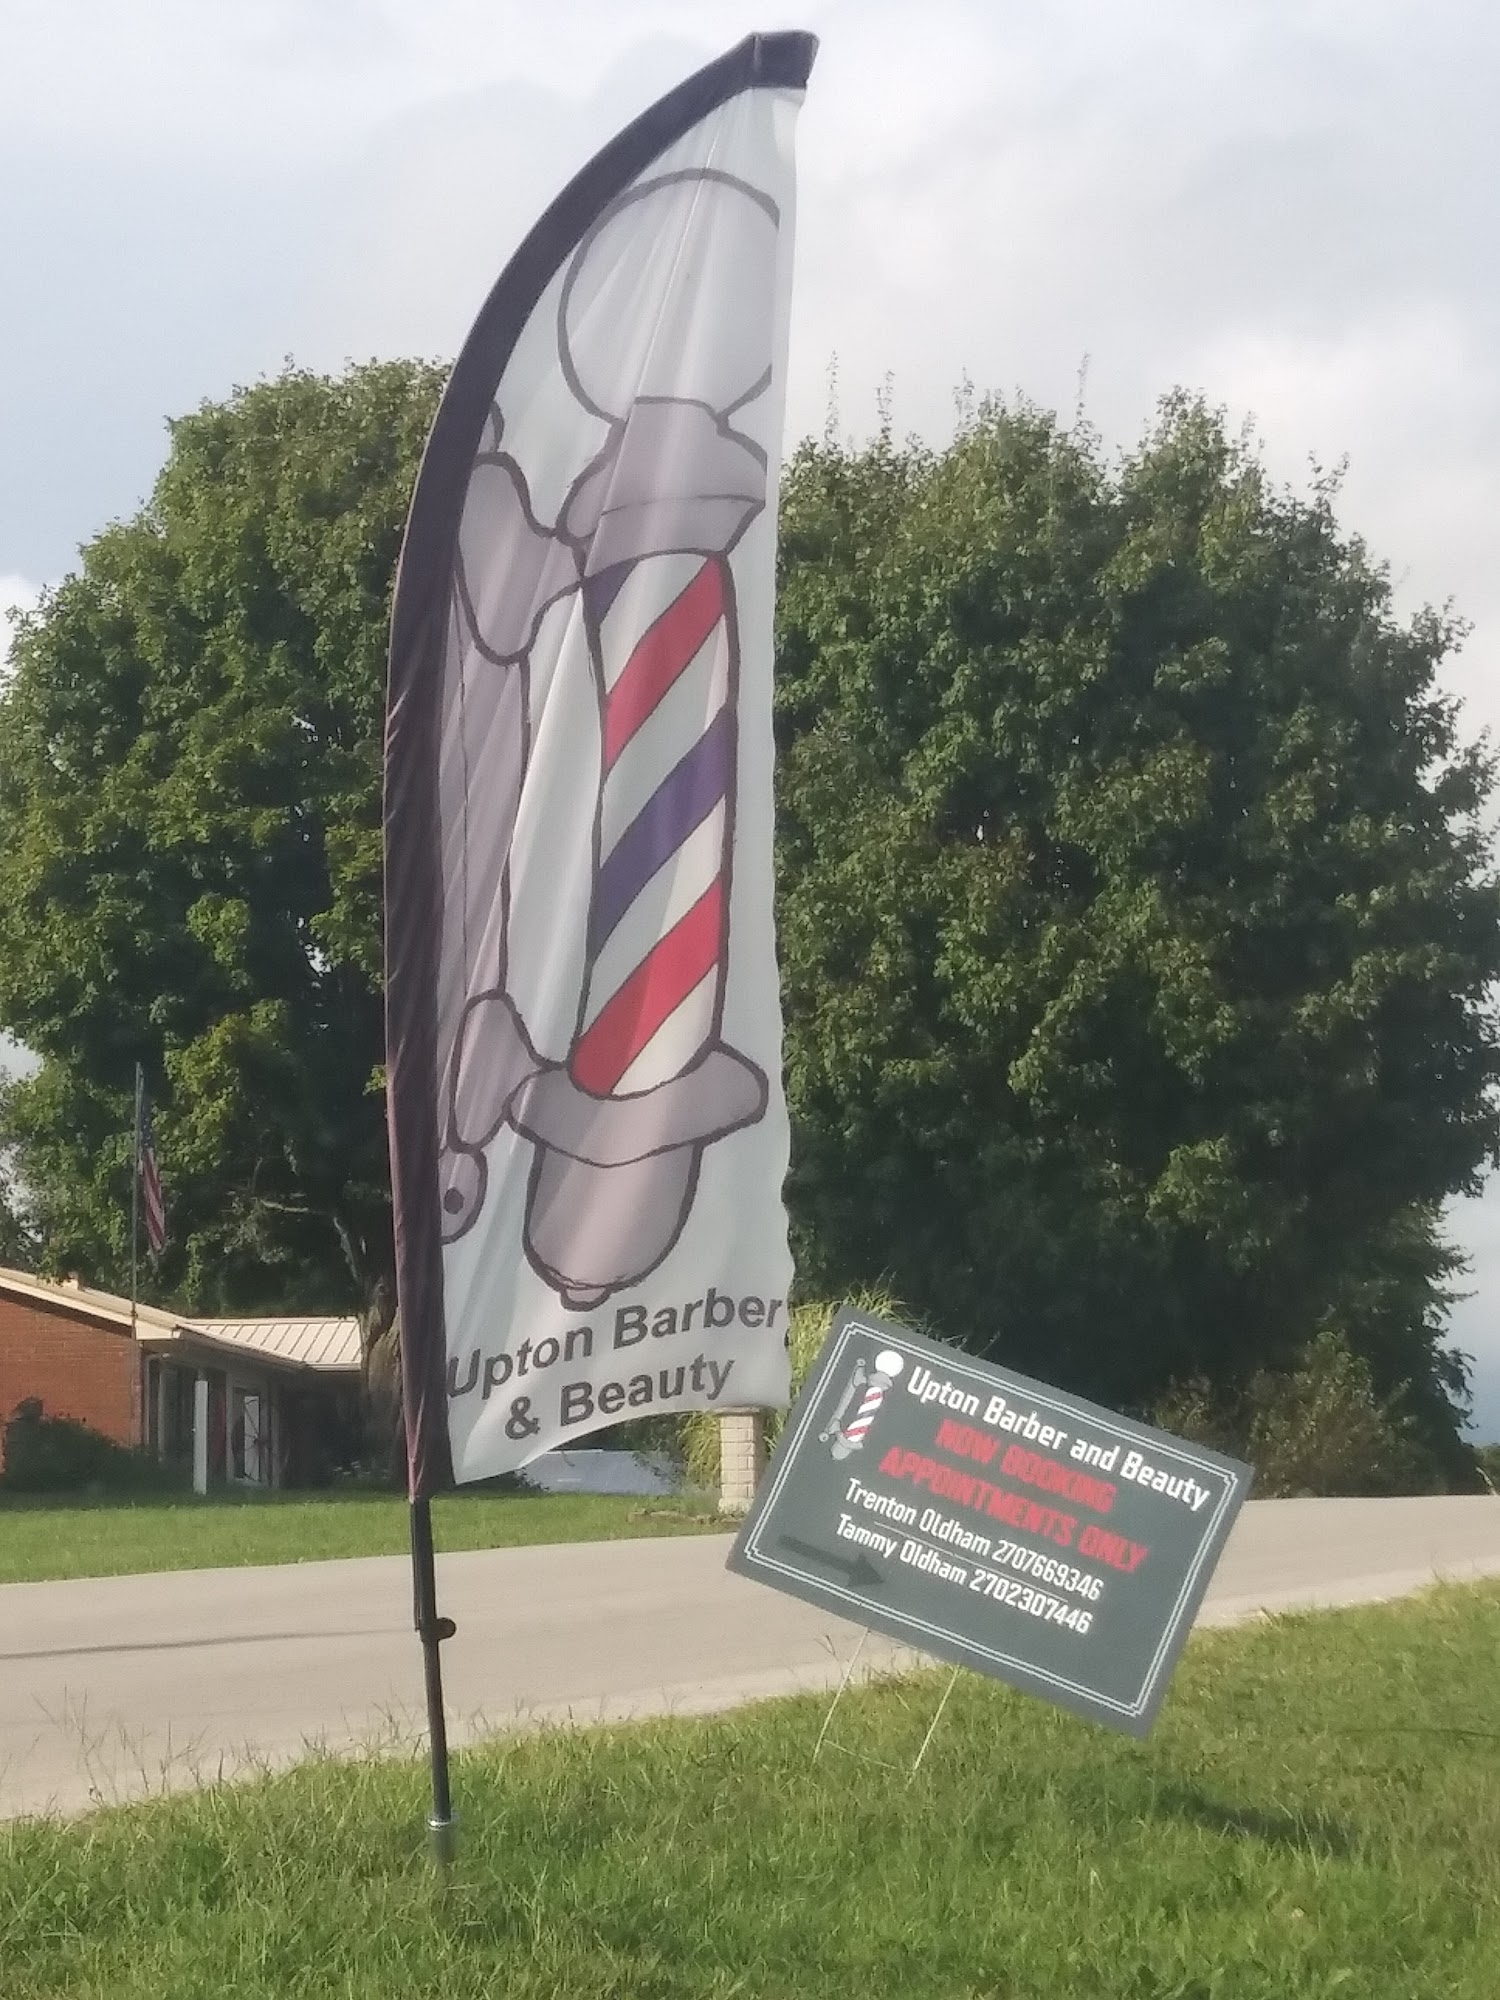 Upton Barber and Beauty 310 N Pleasant Hill Rd, Upton Kentucky 42784